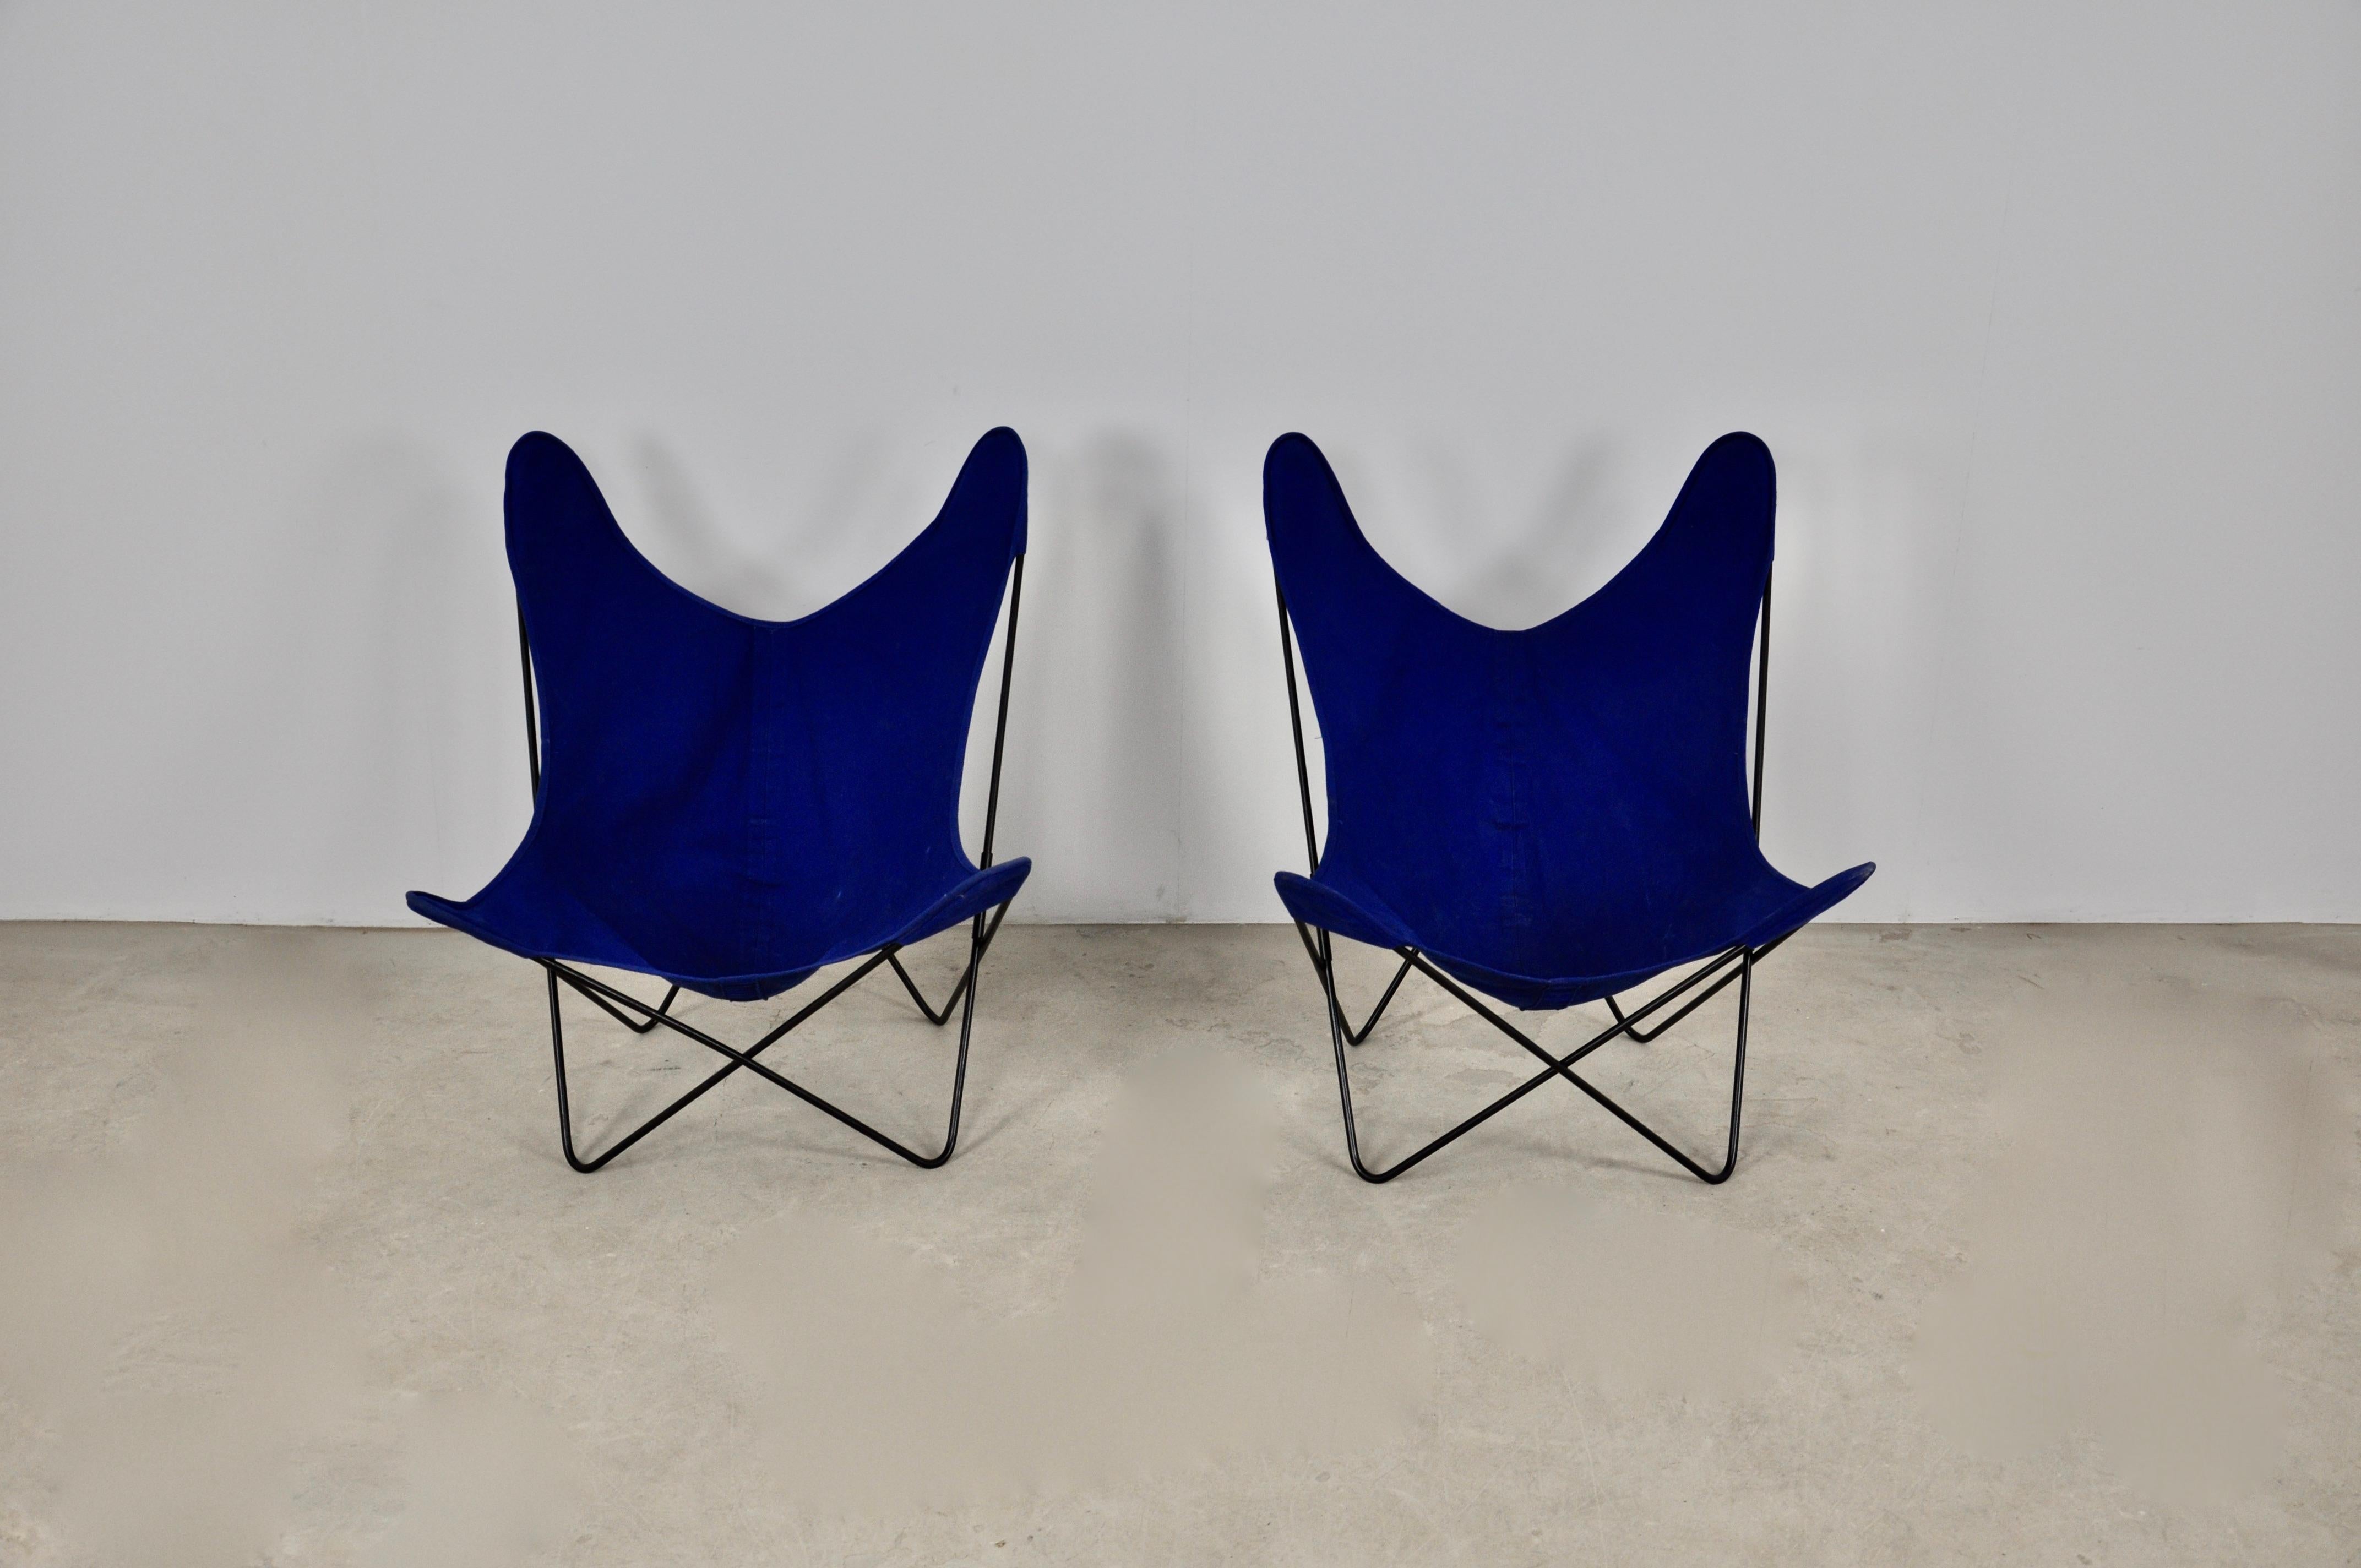 Central American Chairs Butterfly a by Jorge Ferrari-Hardoy for Knoll Inc Set 2